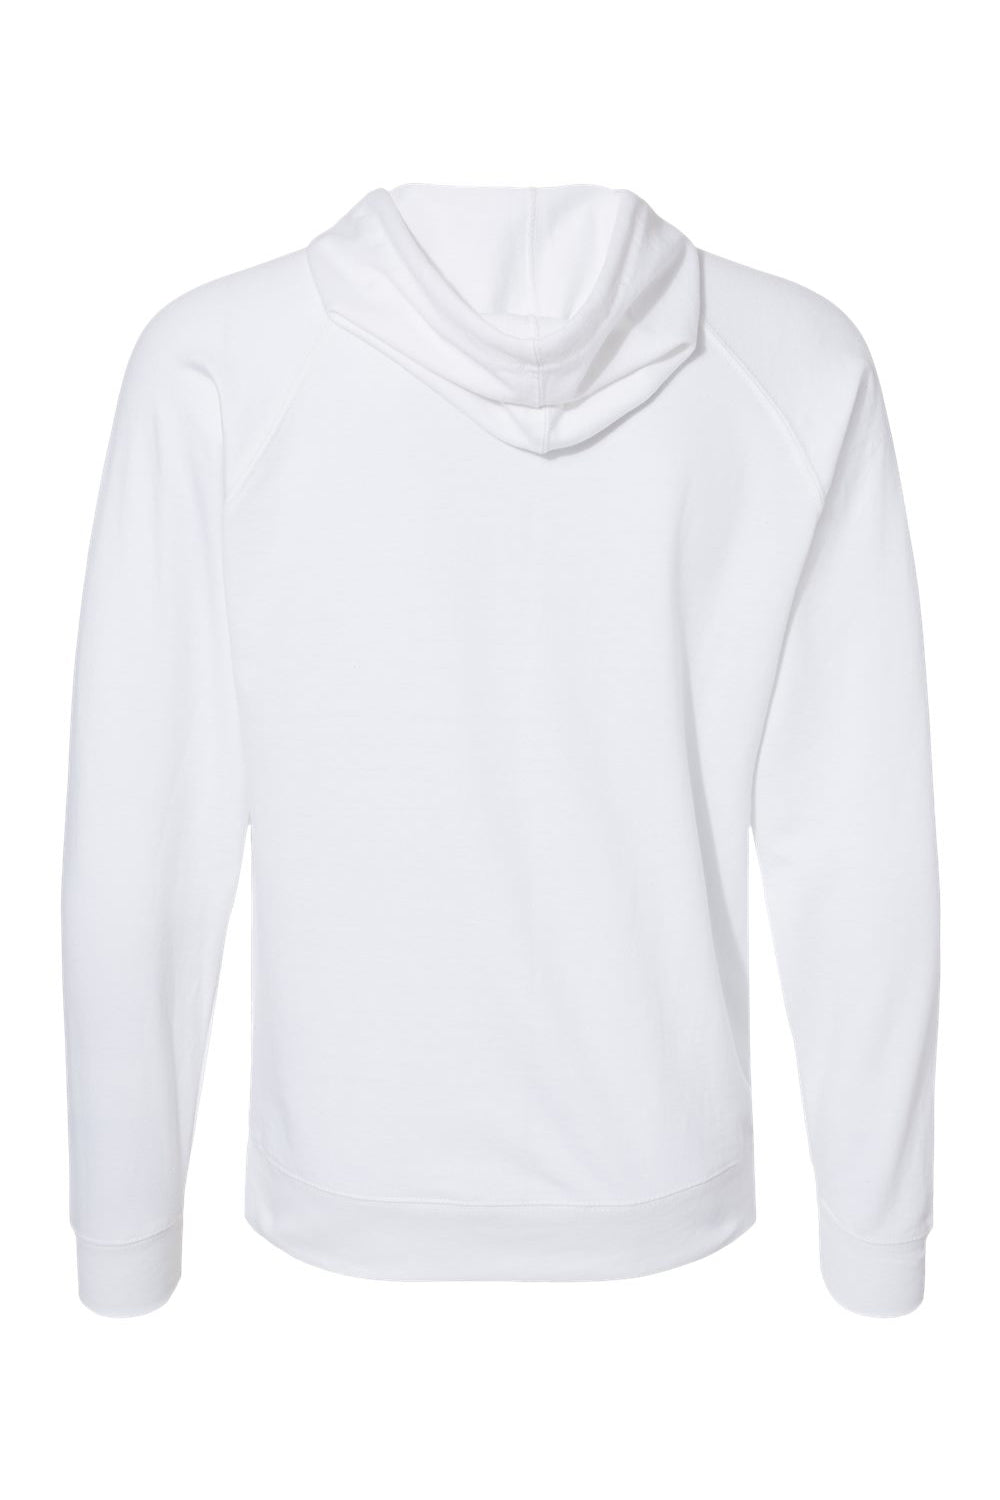 Independent Trading Co. SS1000 Mens Icon Loopback Terry Hooded Sweatshirt Hoodie White Flat Back